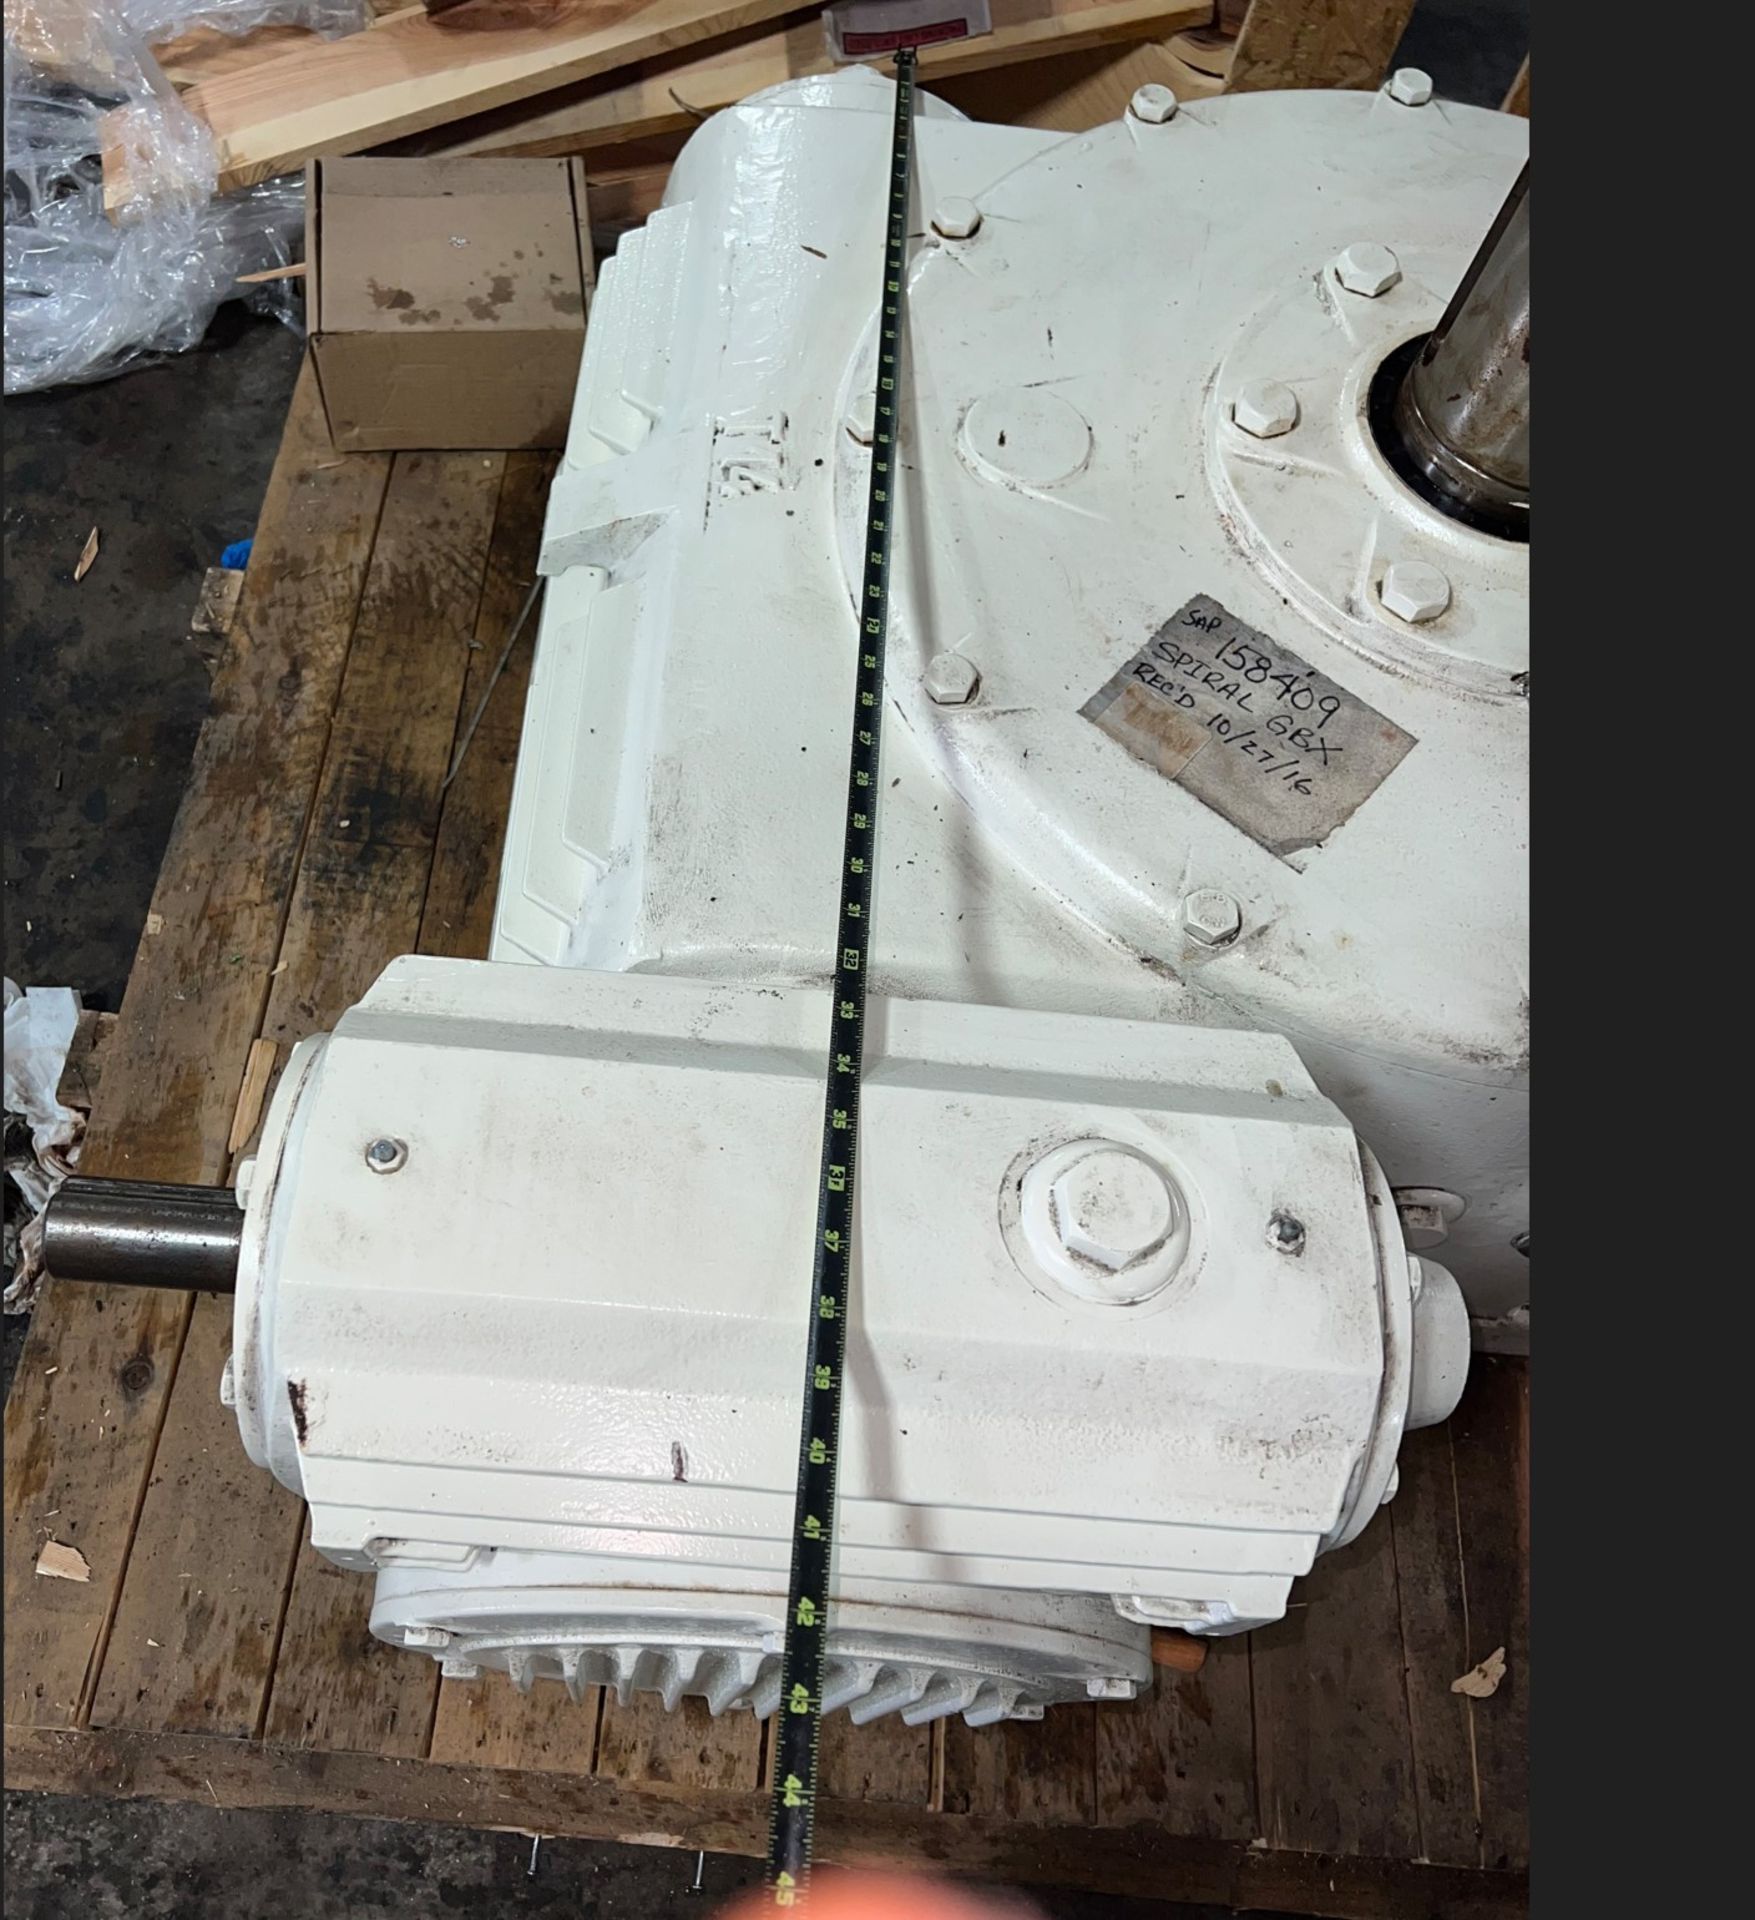 Never Used Gear Box for Spiral Freezer Gear - Large item 2500-pound, with 5" output shaft, 1.75" - Image 7 of 12